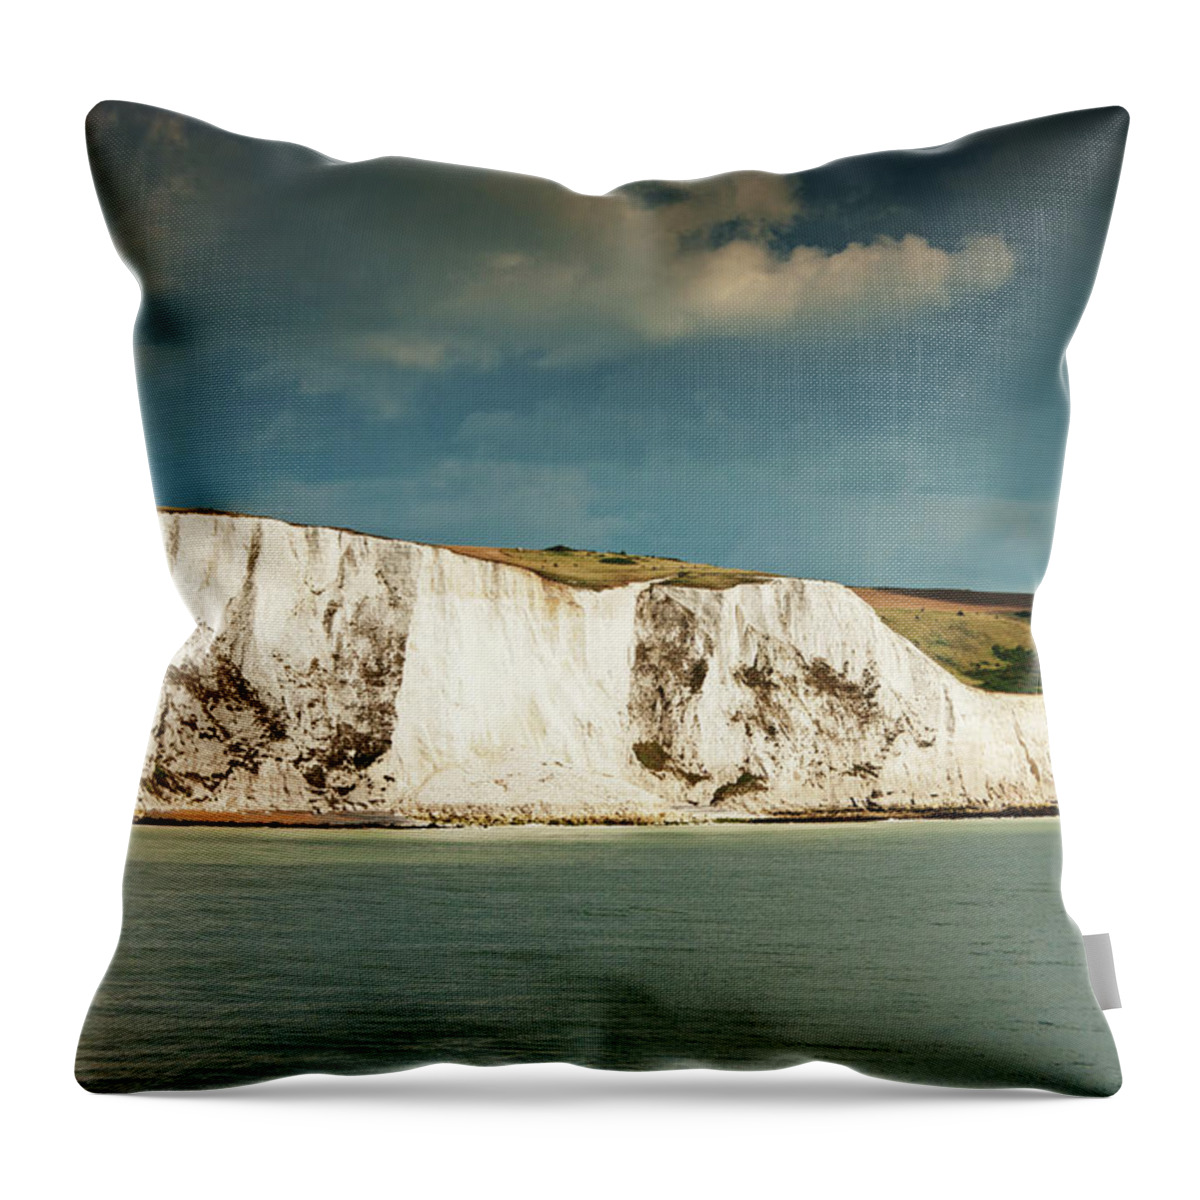 Scenics Throw Pillow featuring the photograph White Cliffs Of Dover by Alphotographic